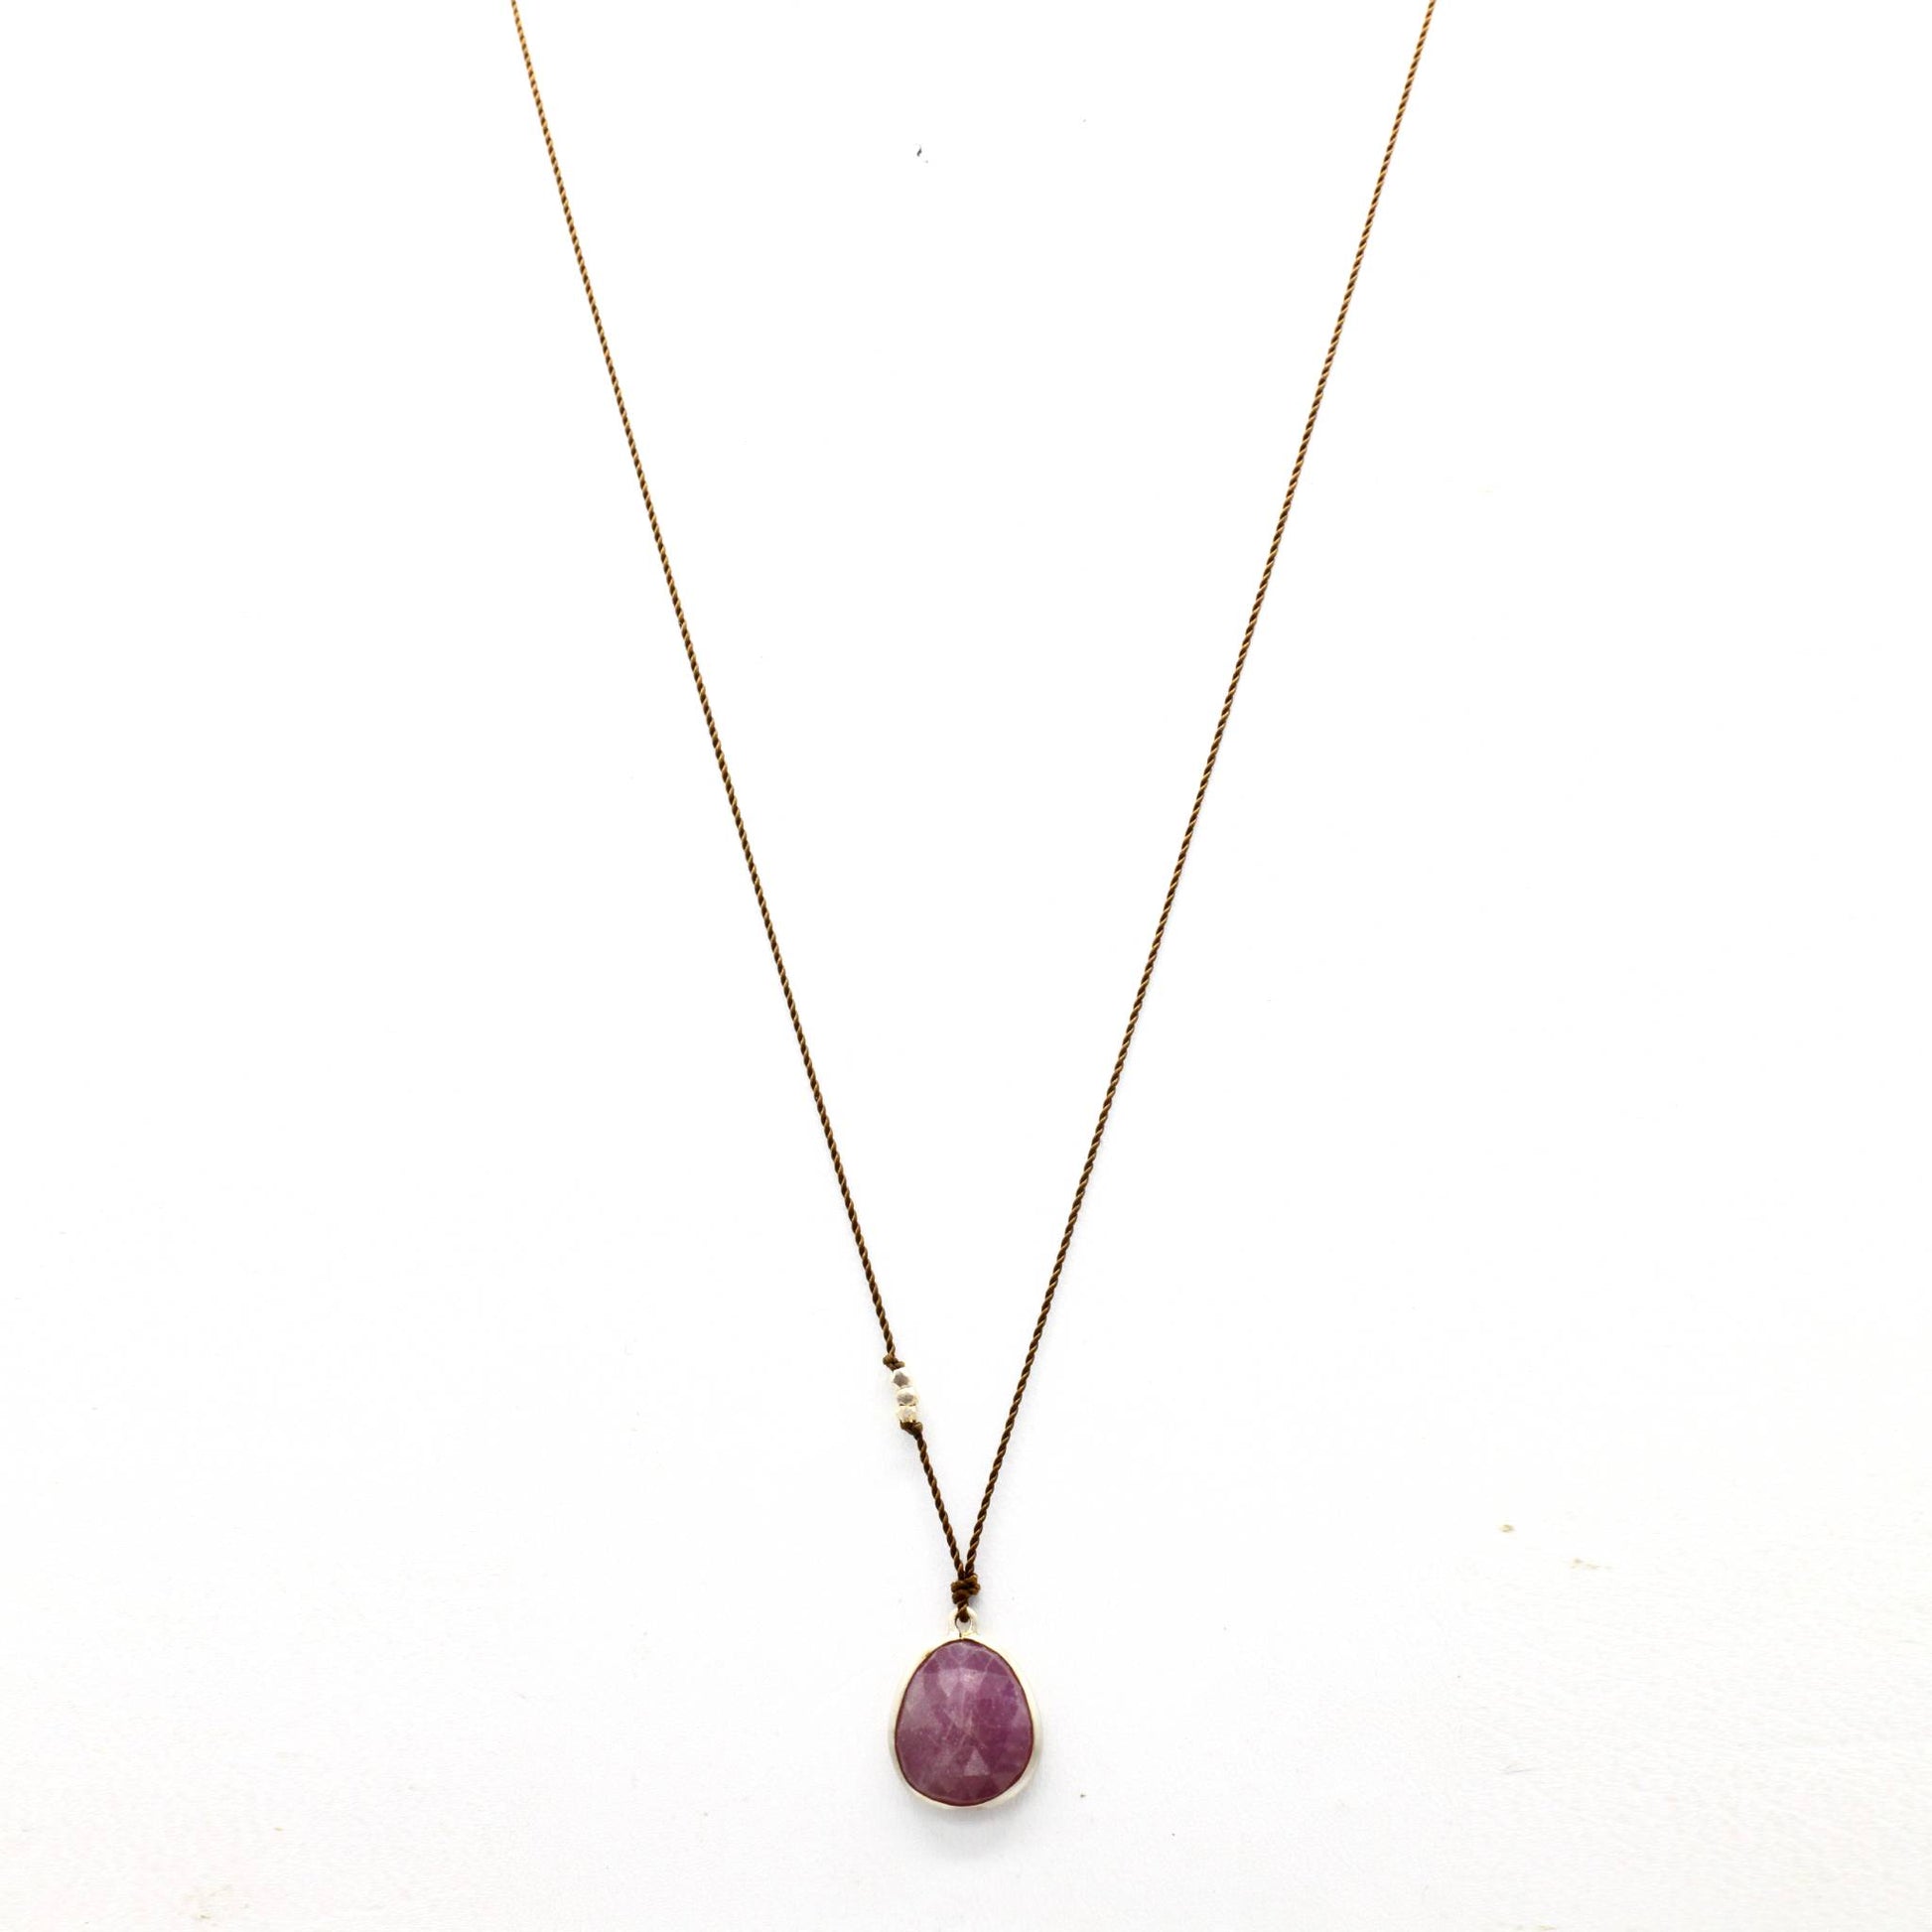 Margaret Solow Jewelry | Pink Sapphire + Sterling Silver Necklace | Firecracker